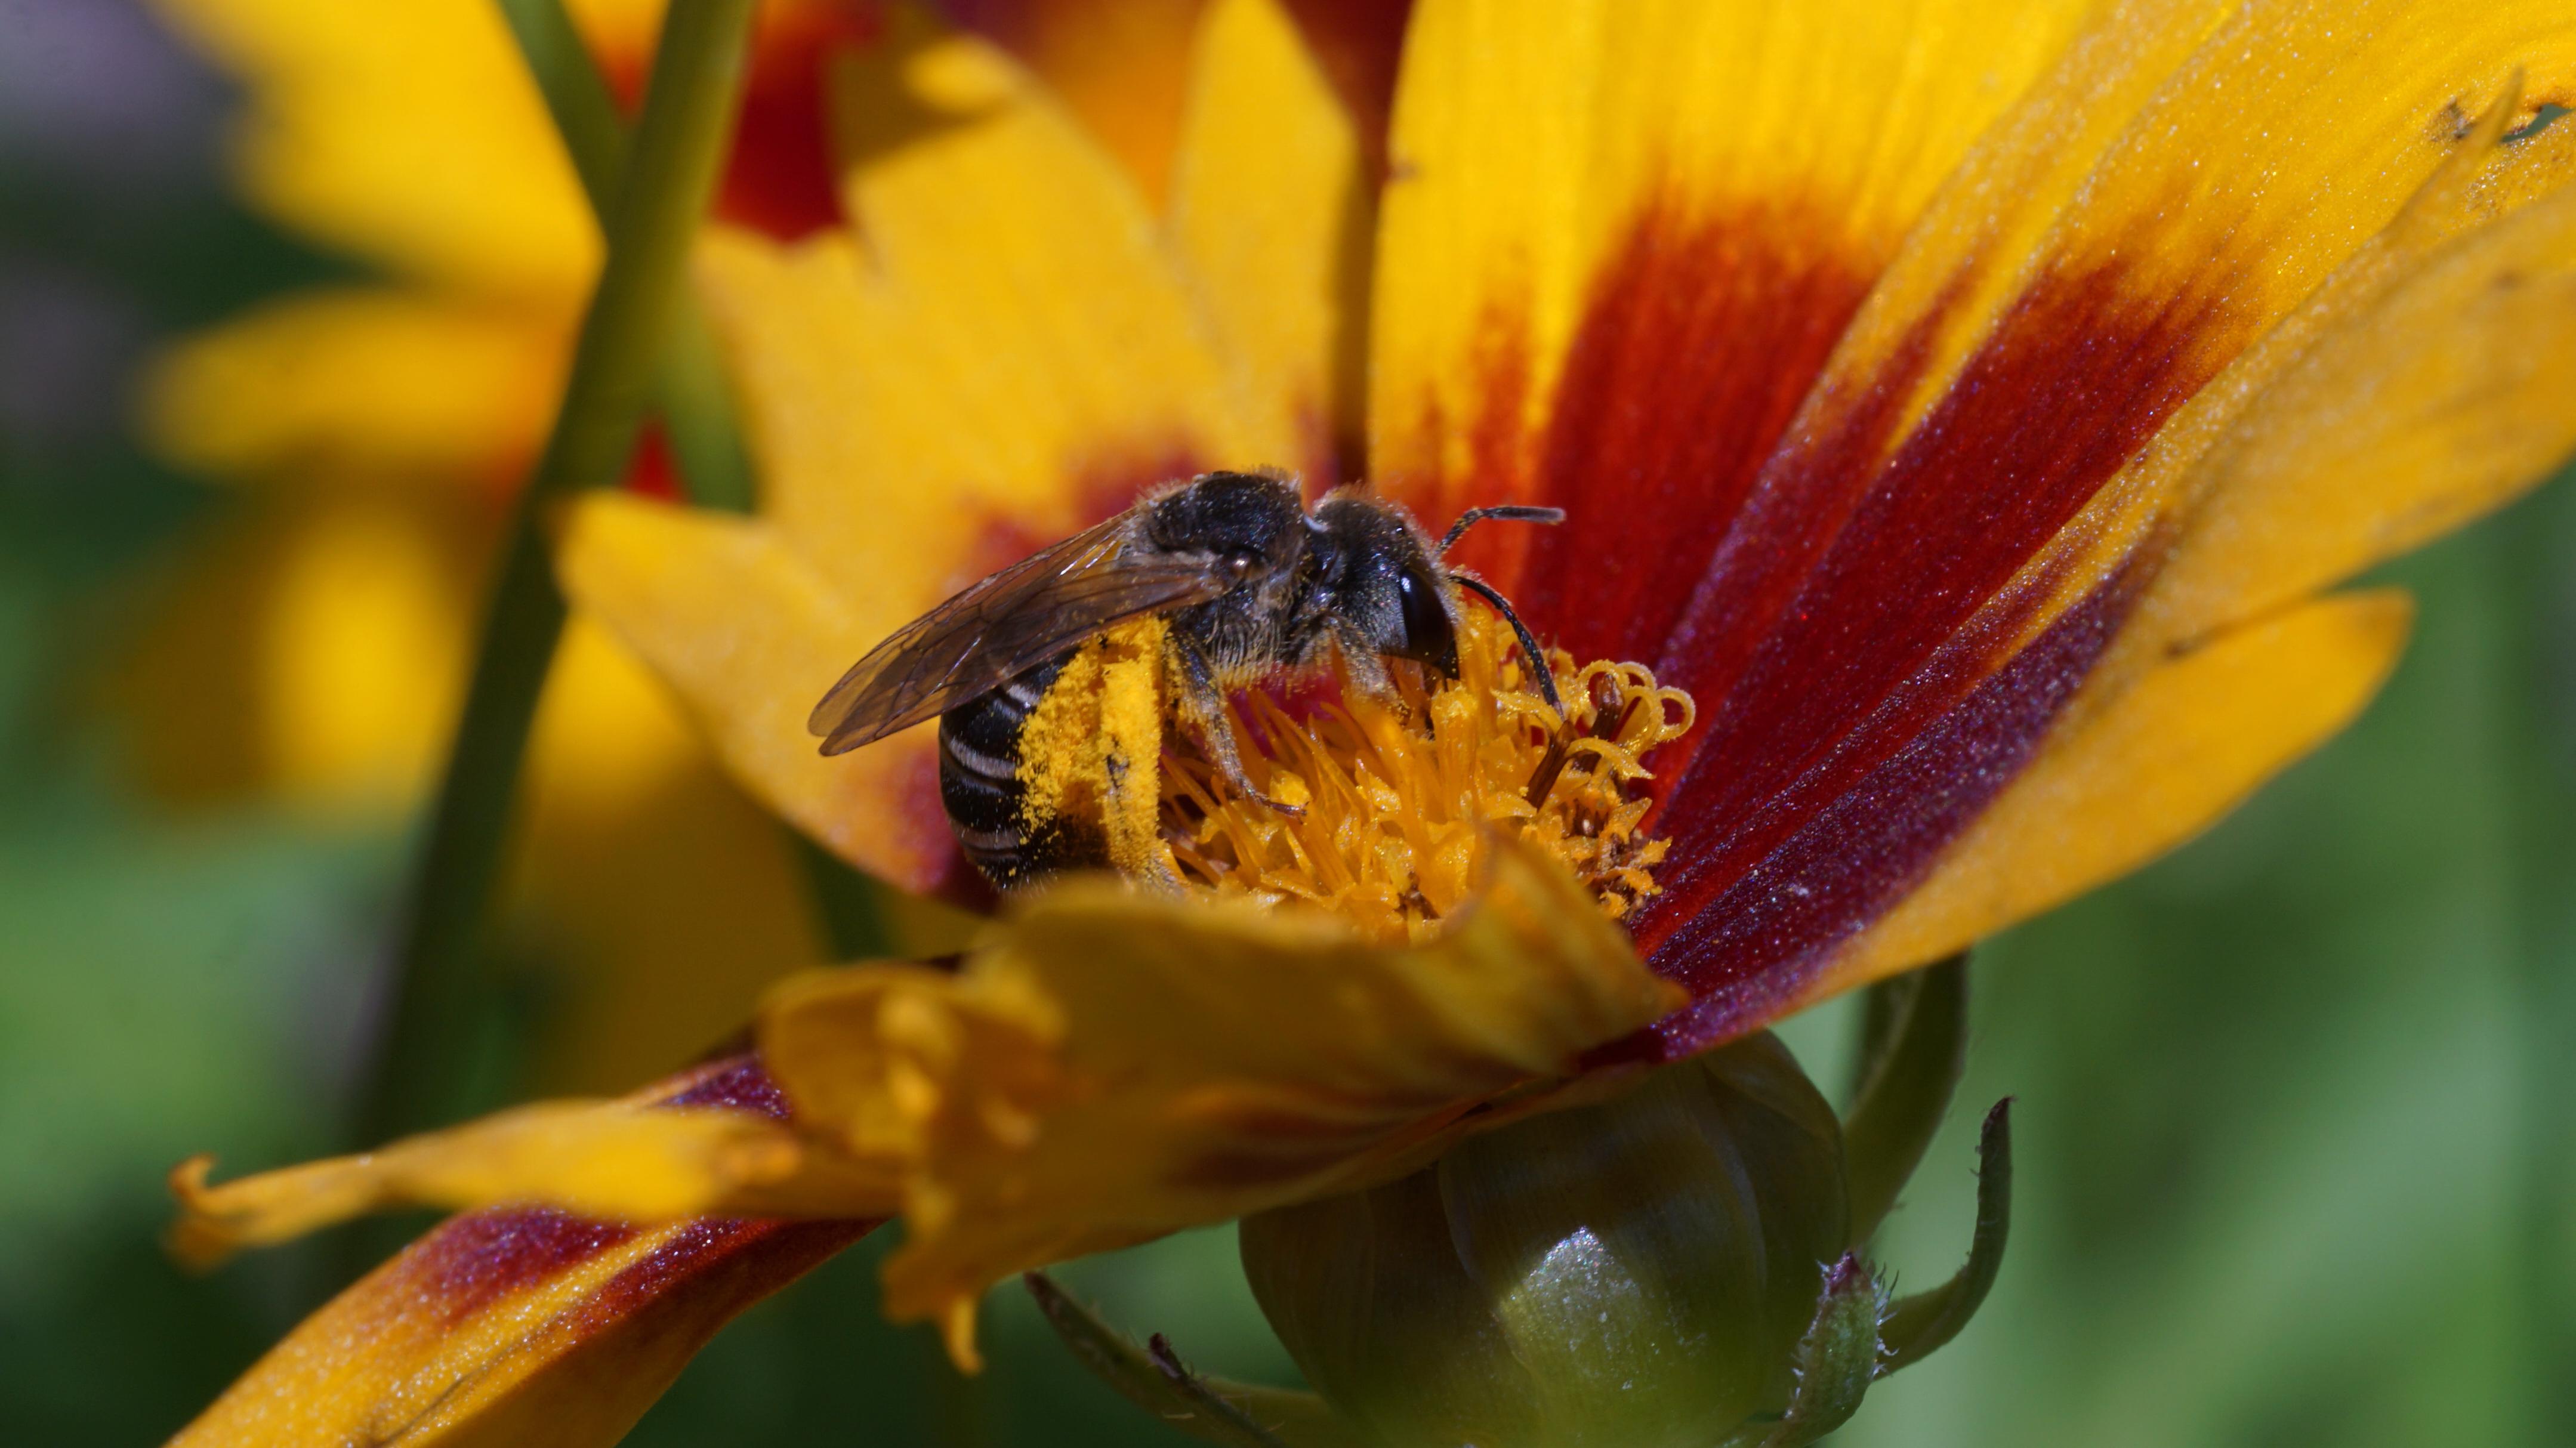 A leafcutter bee on a yellow flower.